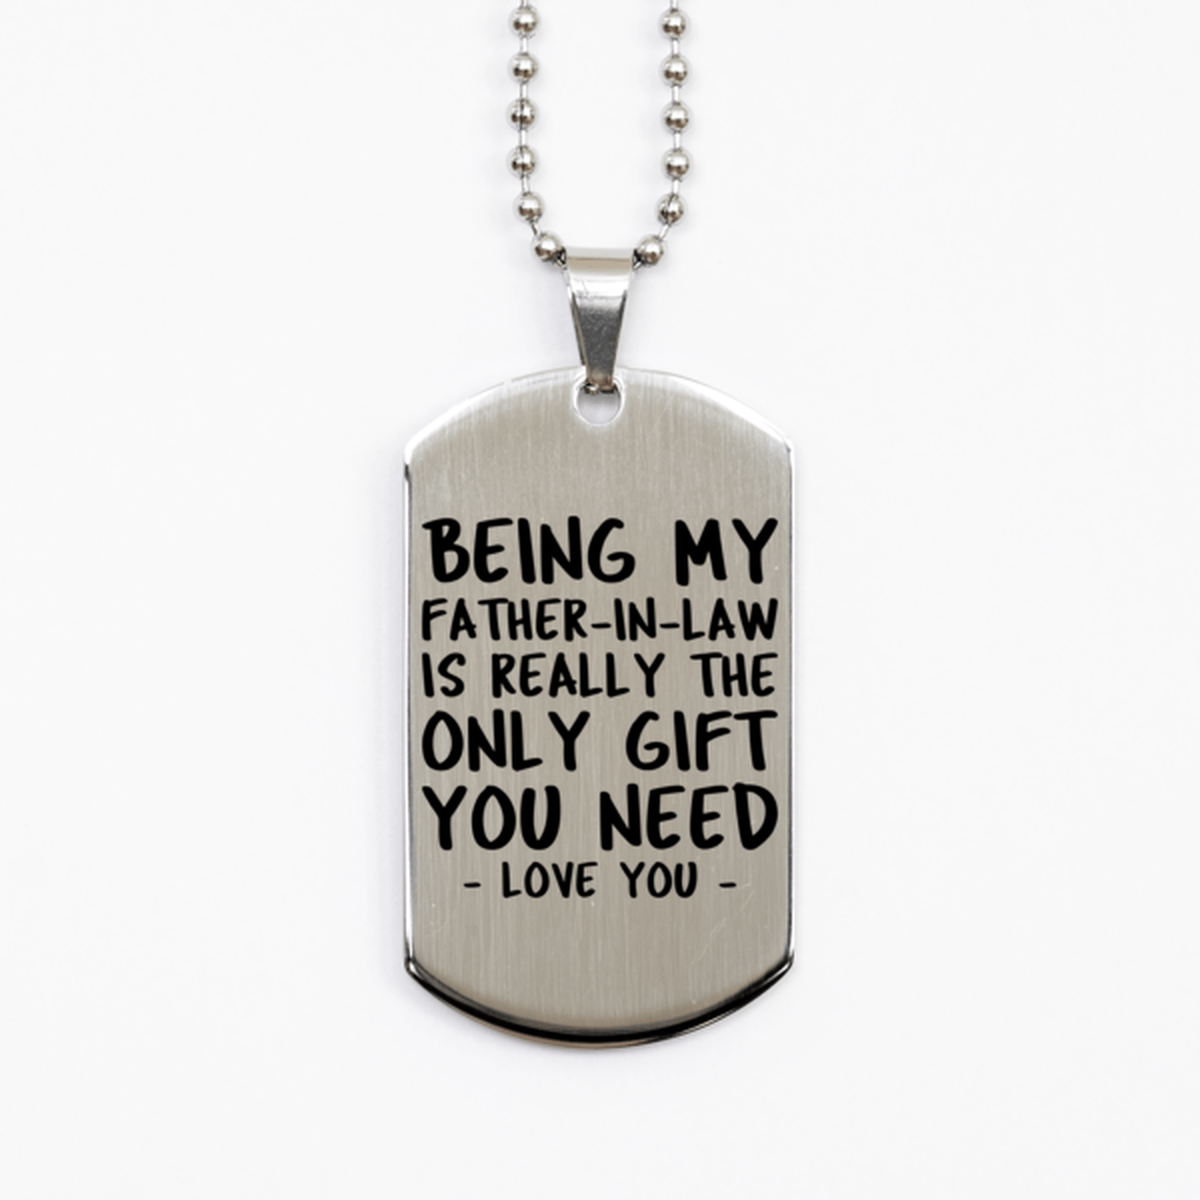 Funny Father-in-law Silver Dog Tag Necklace, Being My Father-in-law Is Really the Only Gift You Need, Best Birthday Gifts for Father-in-law